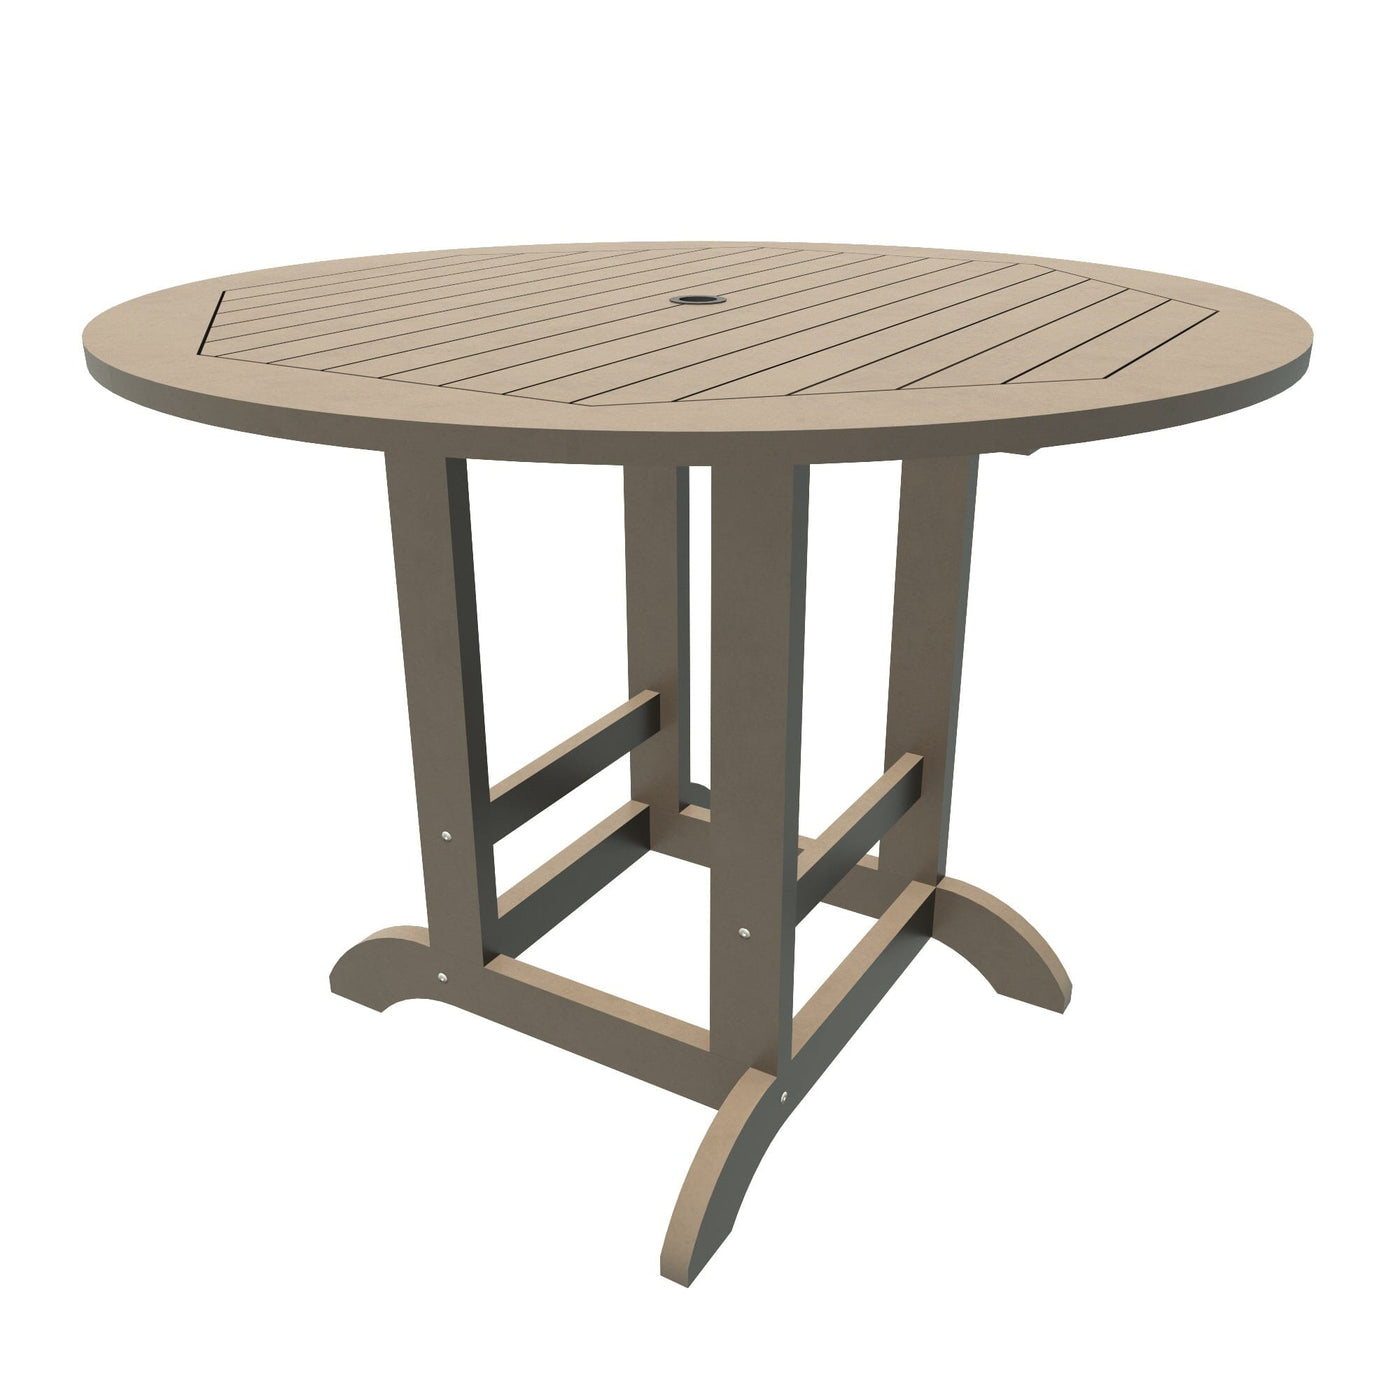 Round 48in Diameter Dining Table - Counter Height Dining Highwood USA Woodland Brown 